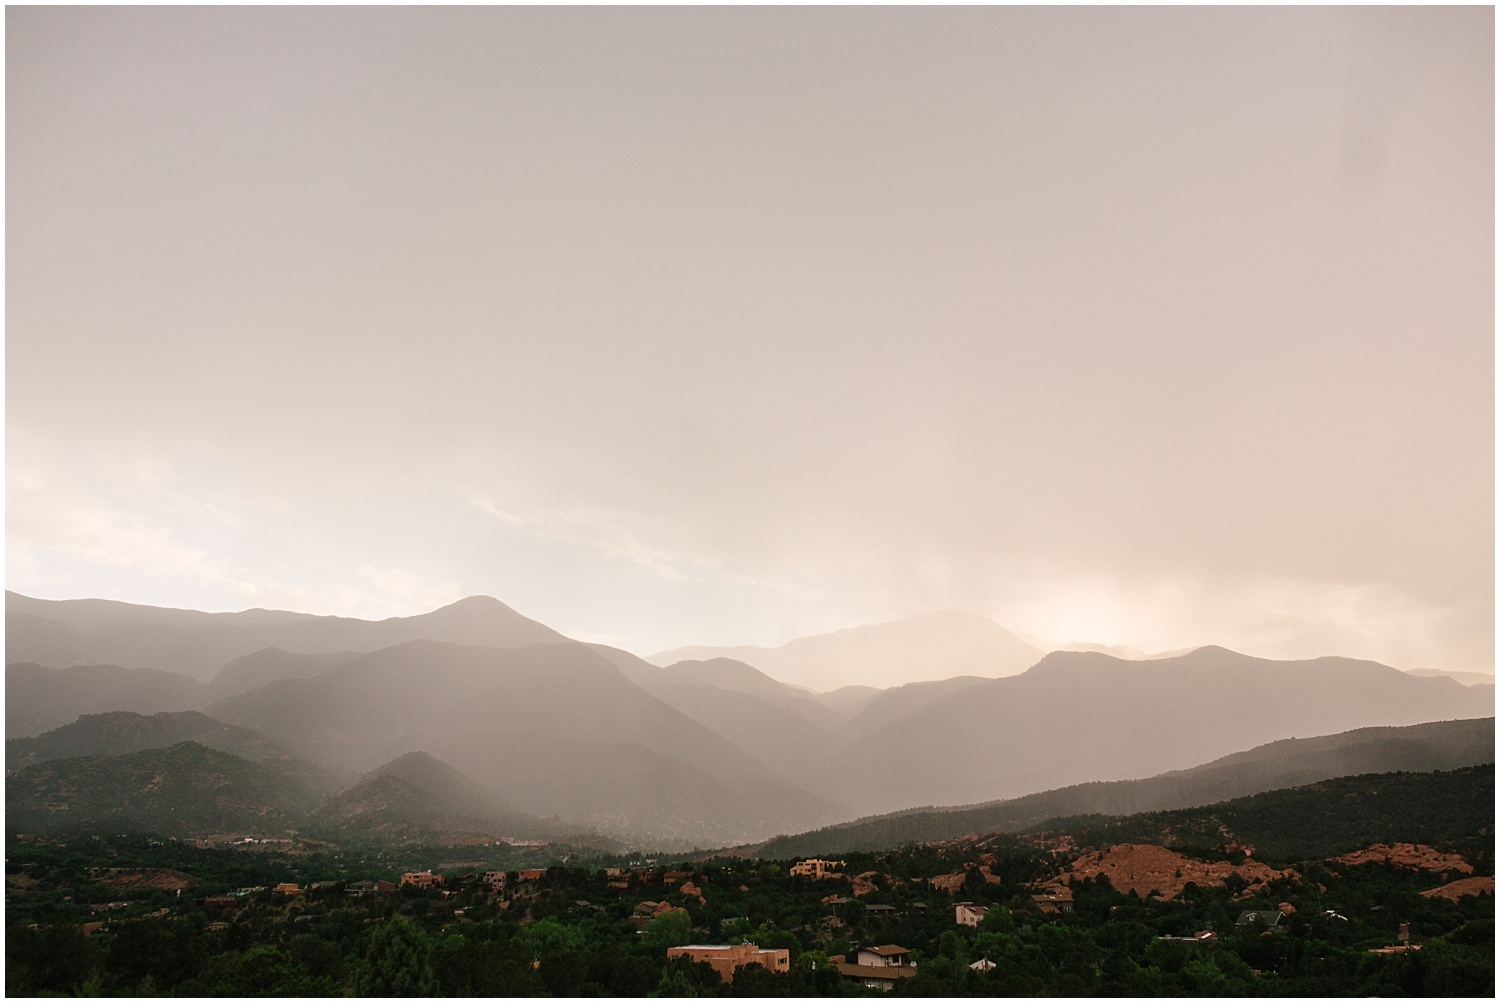 Rain storm over Pikes Peak at Garden of the Gods in Colorado Springs